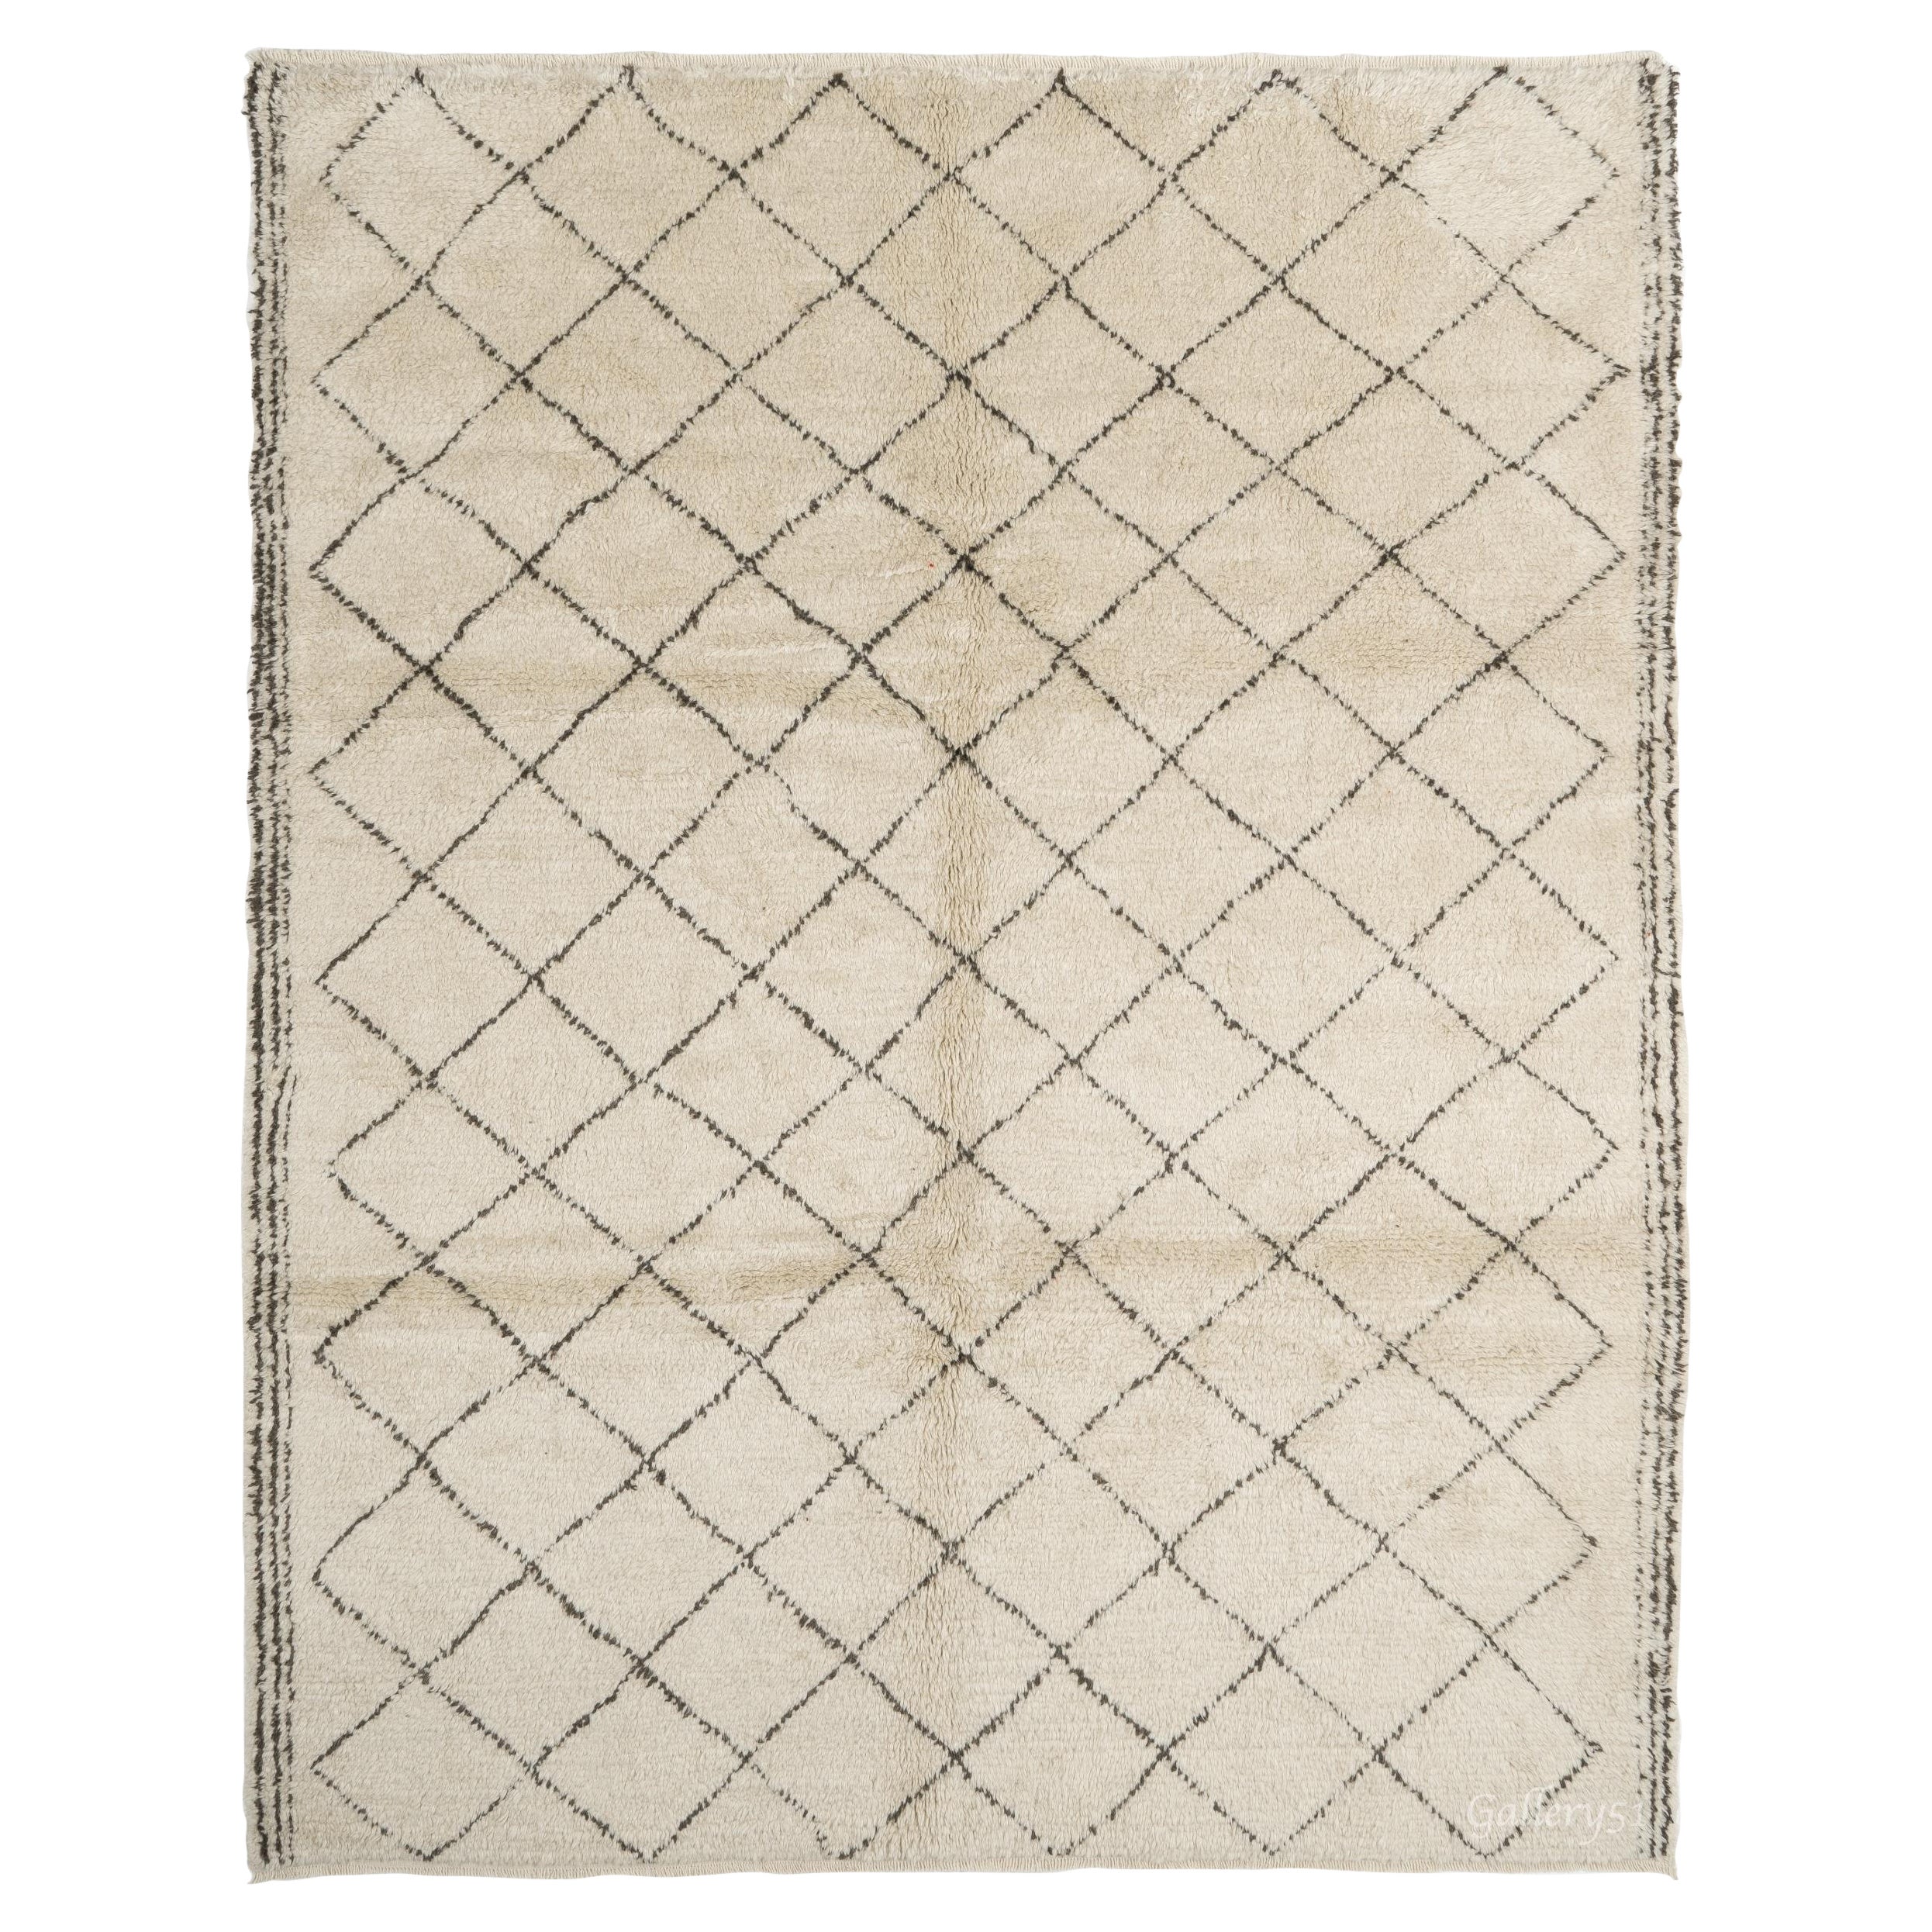 Beni Ourain Wool Rug, Hand-Knotted Moroccan Carpet, Custom Option Avl. For Sale